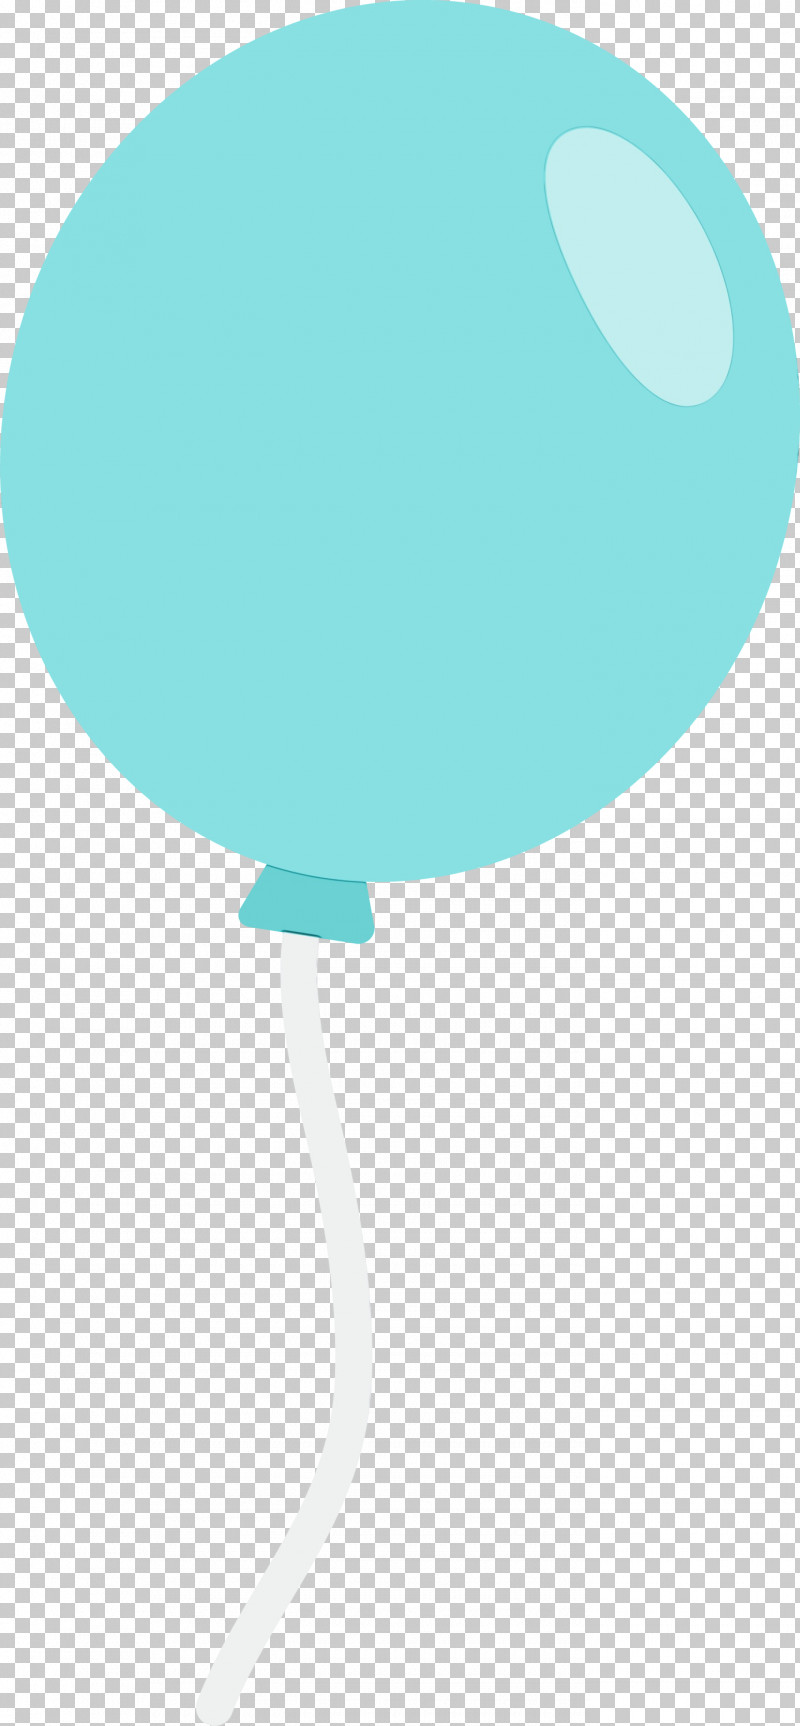 Turquoise Aqua Teal Turquoise Balloon PNG, Clipart, Aqua, Balloon, Paint, Teal, Turquoise Free PNG Download